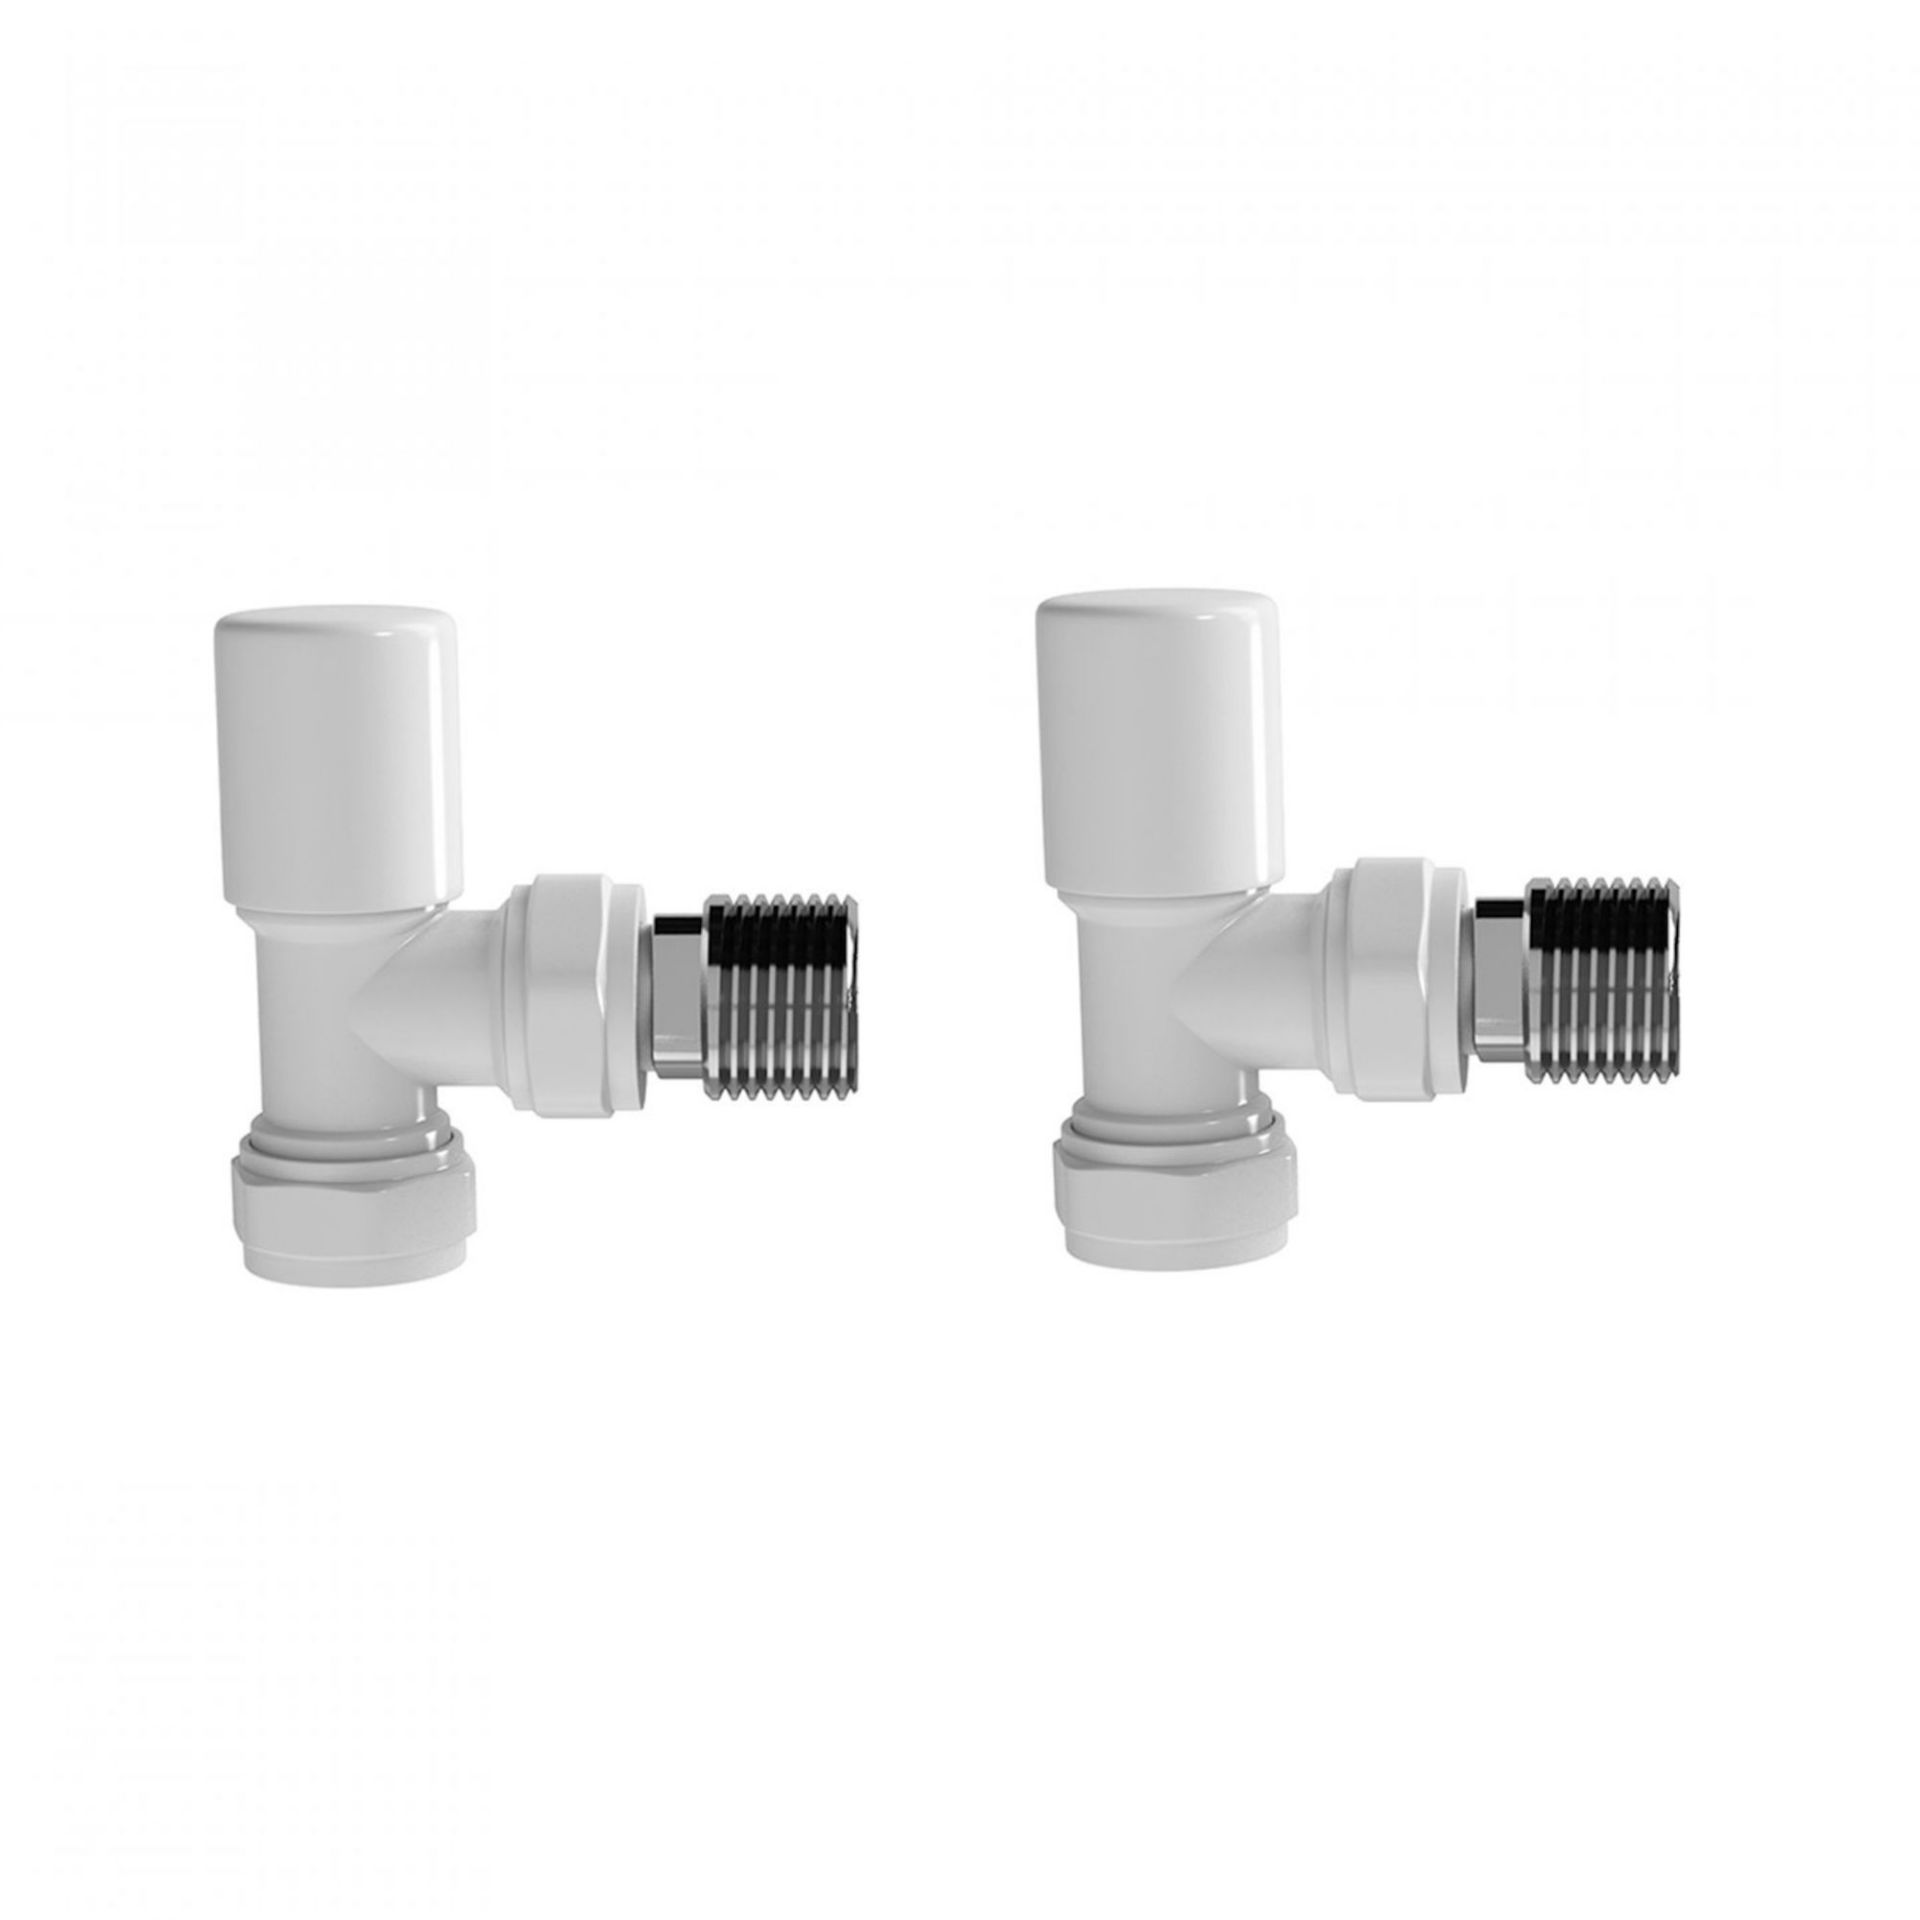 (MP68) 15mm Standard Connection Angled Gloss White Radiator Valves Solid brass construct Angled